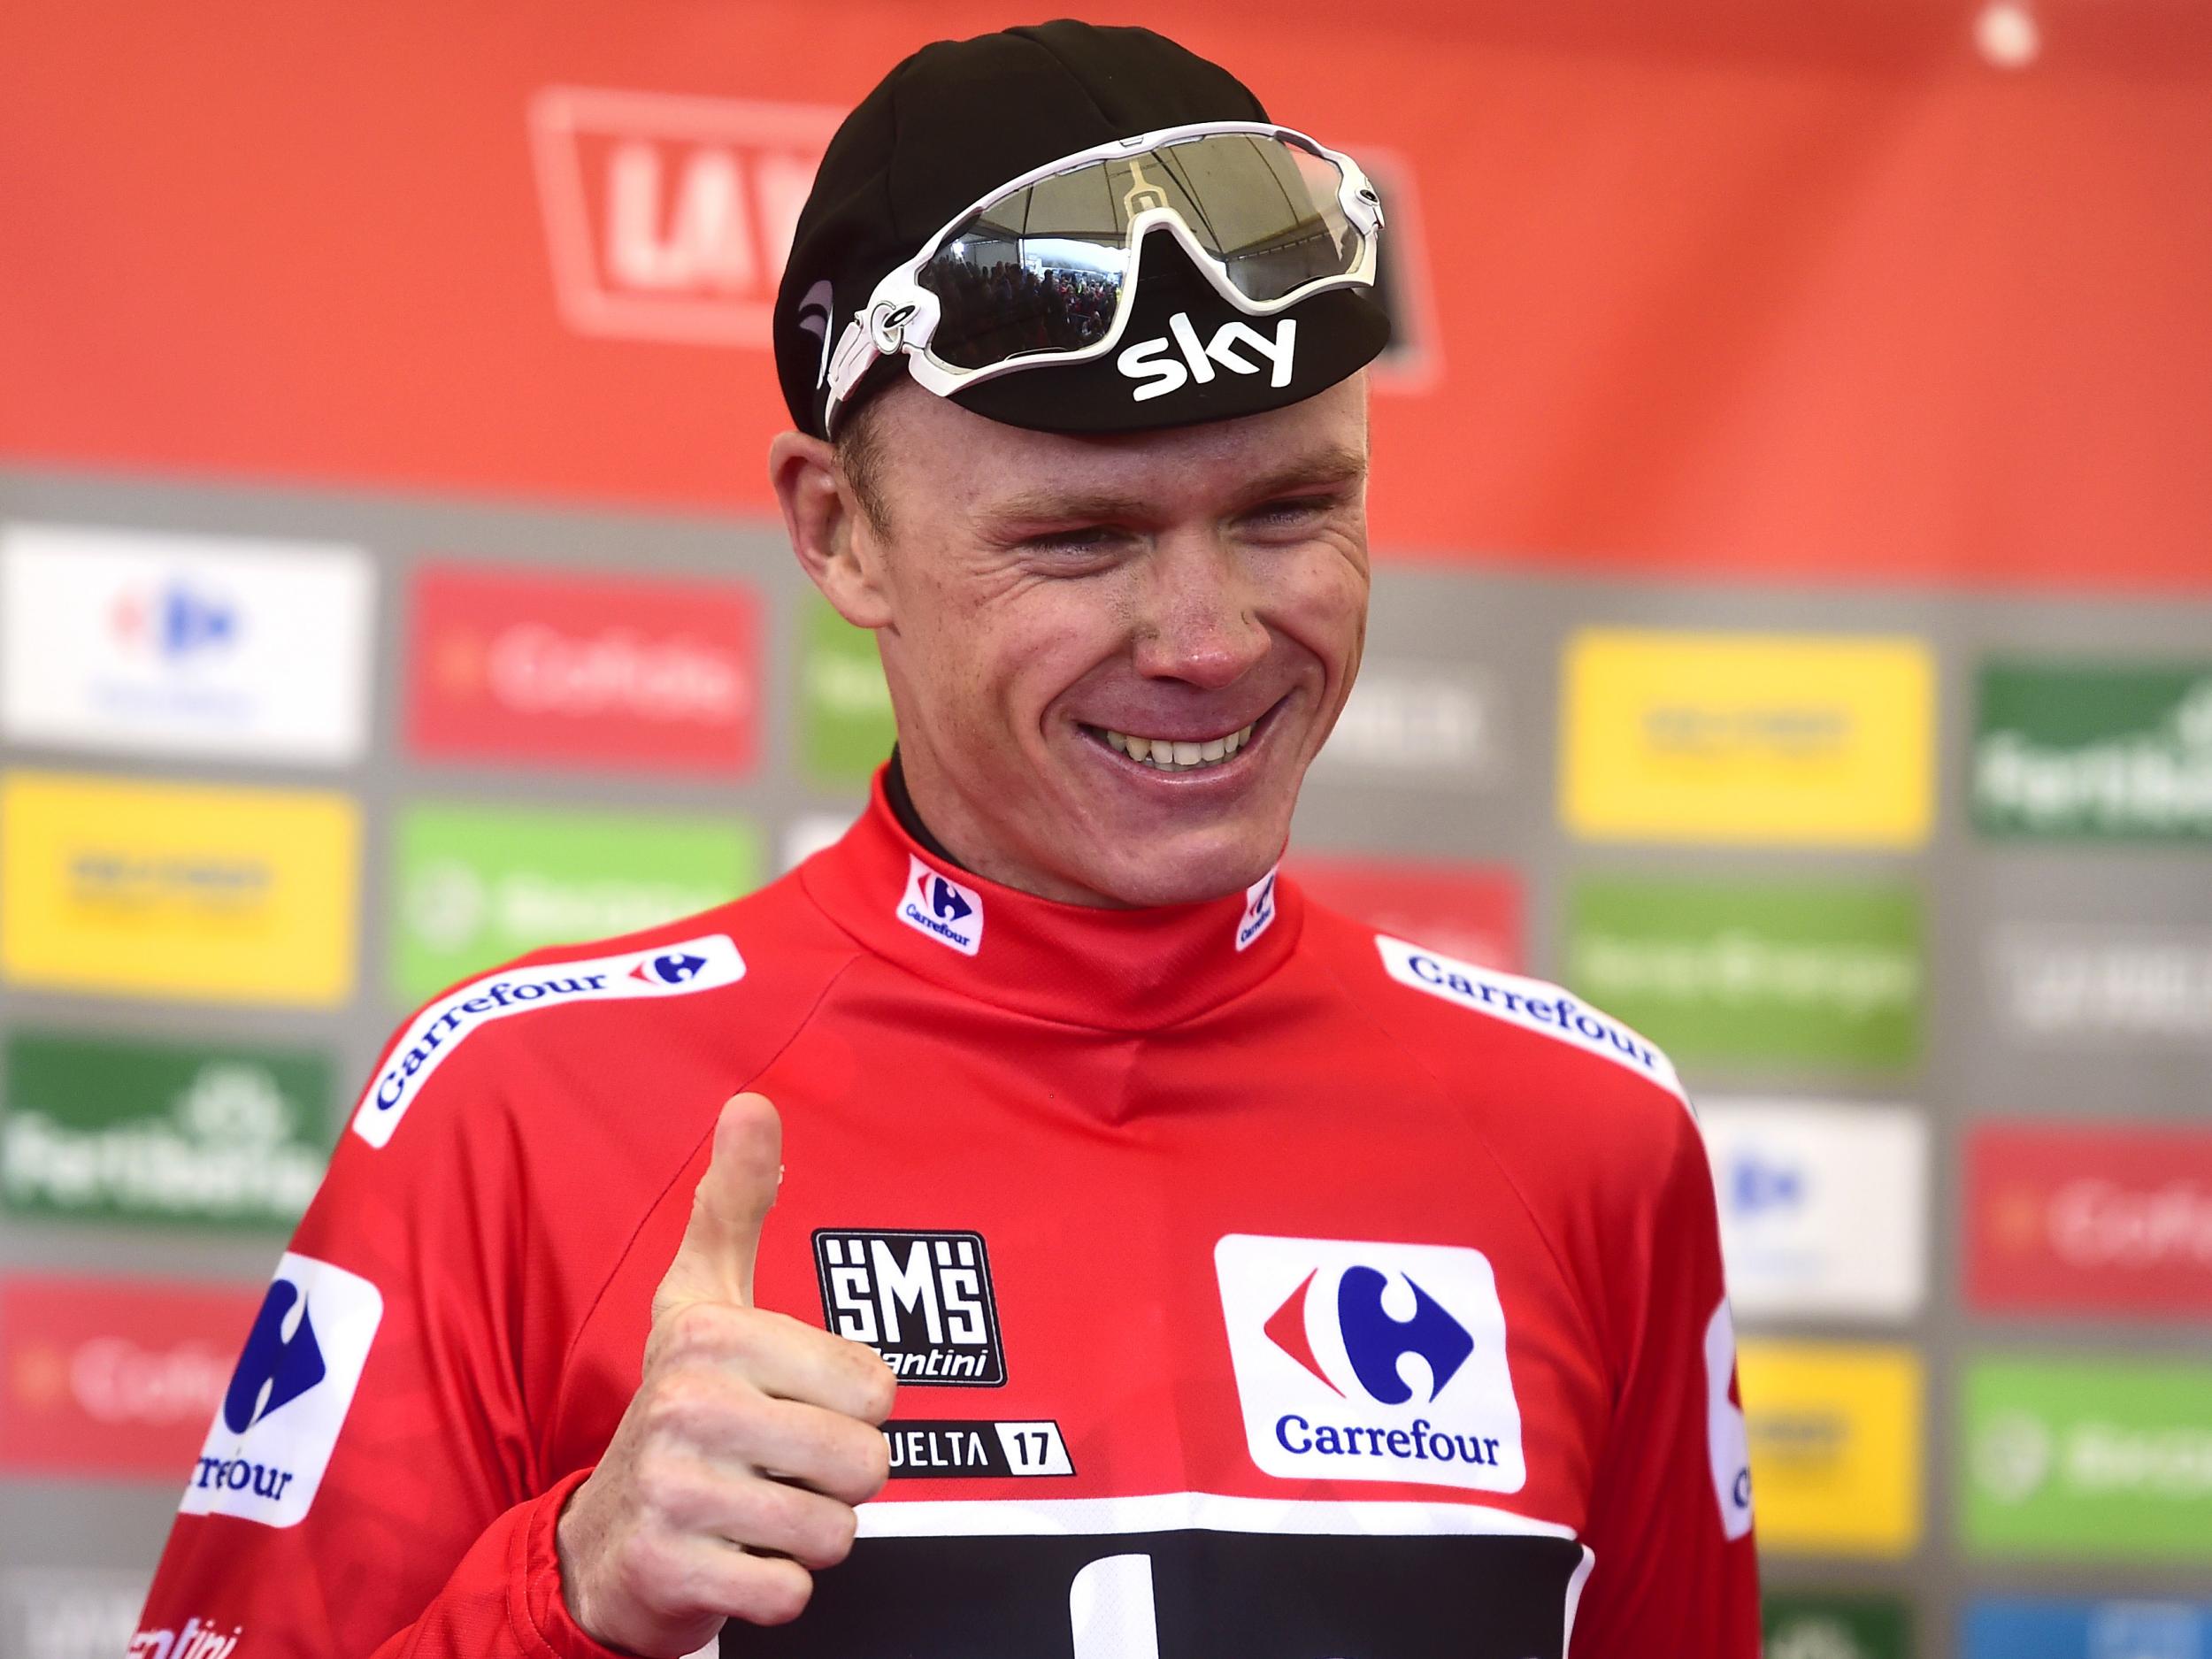 Chris Froome extended his lead at the top of the general classification